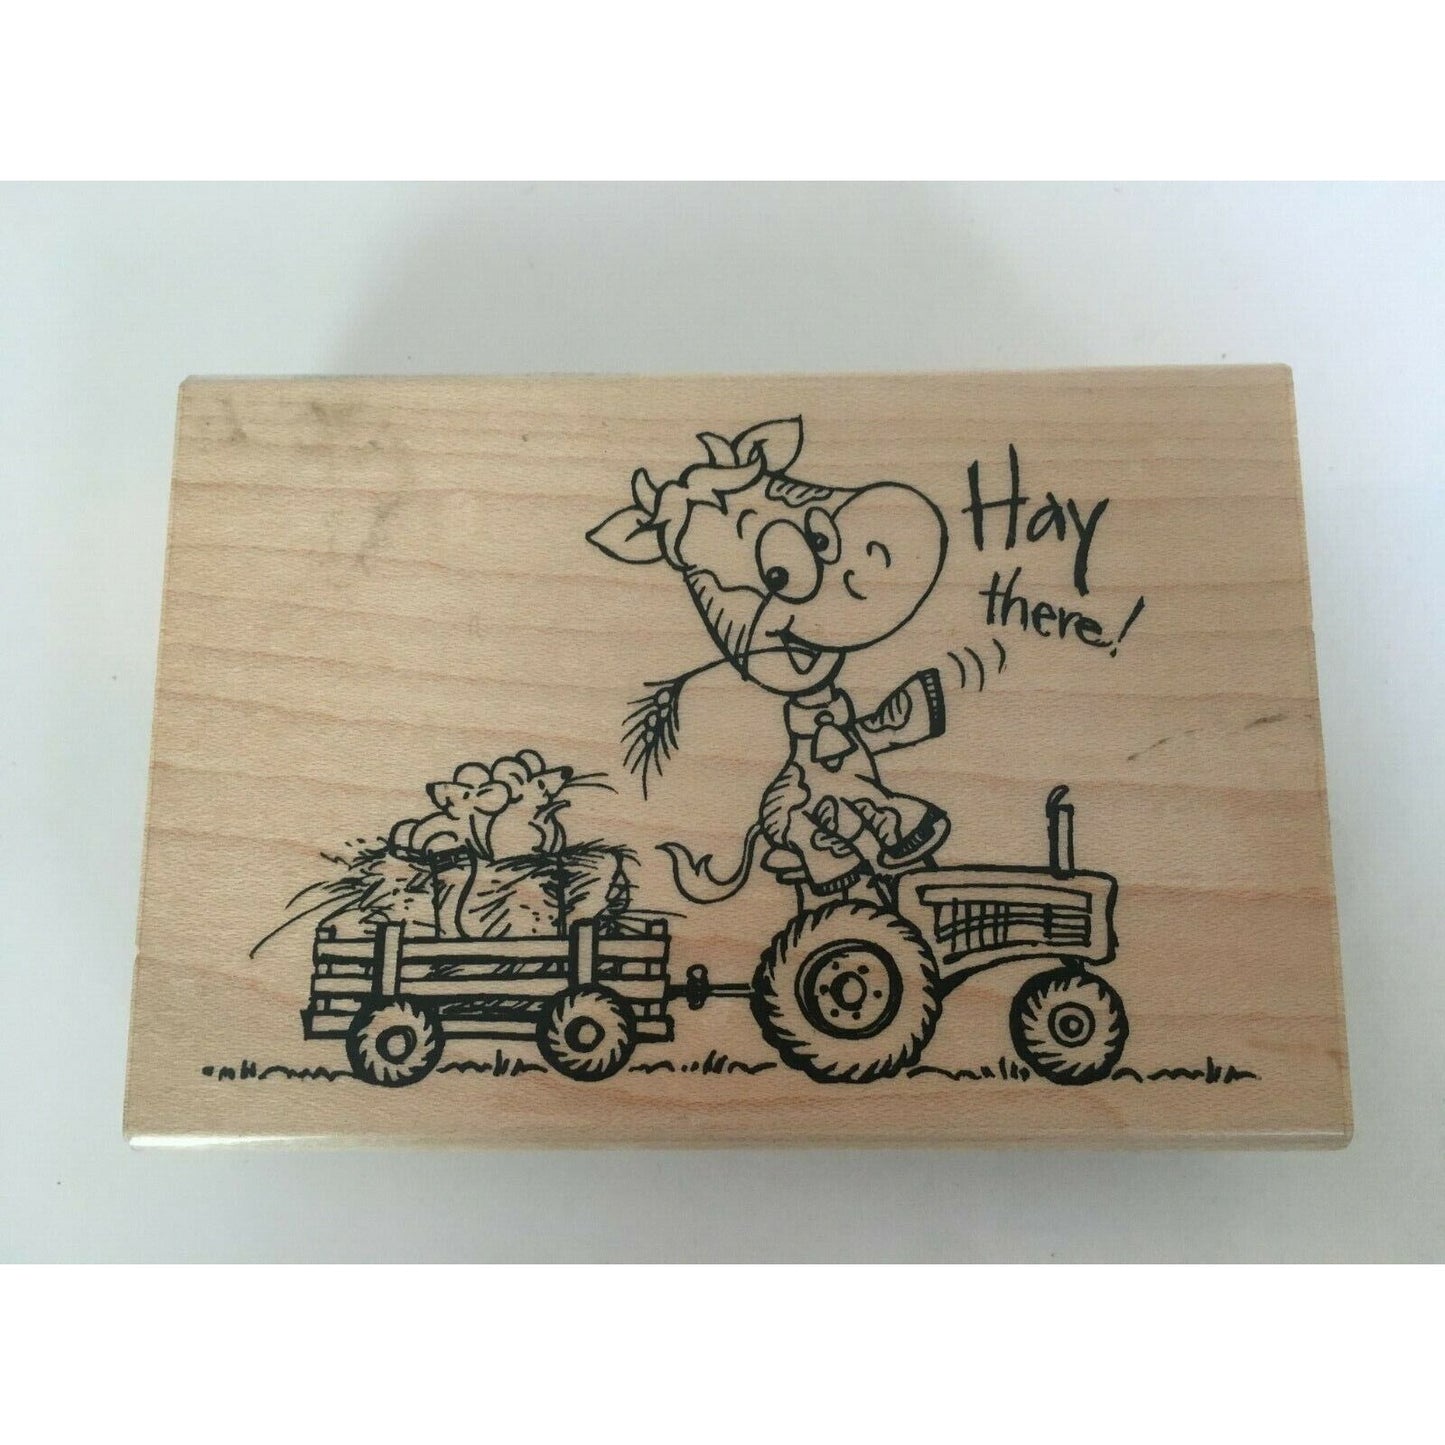 Stampendous Rubber Stamp Cow Farm Cowlik Tractor Hay There Pun Funny Card Making